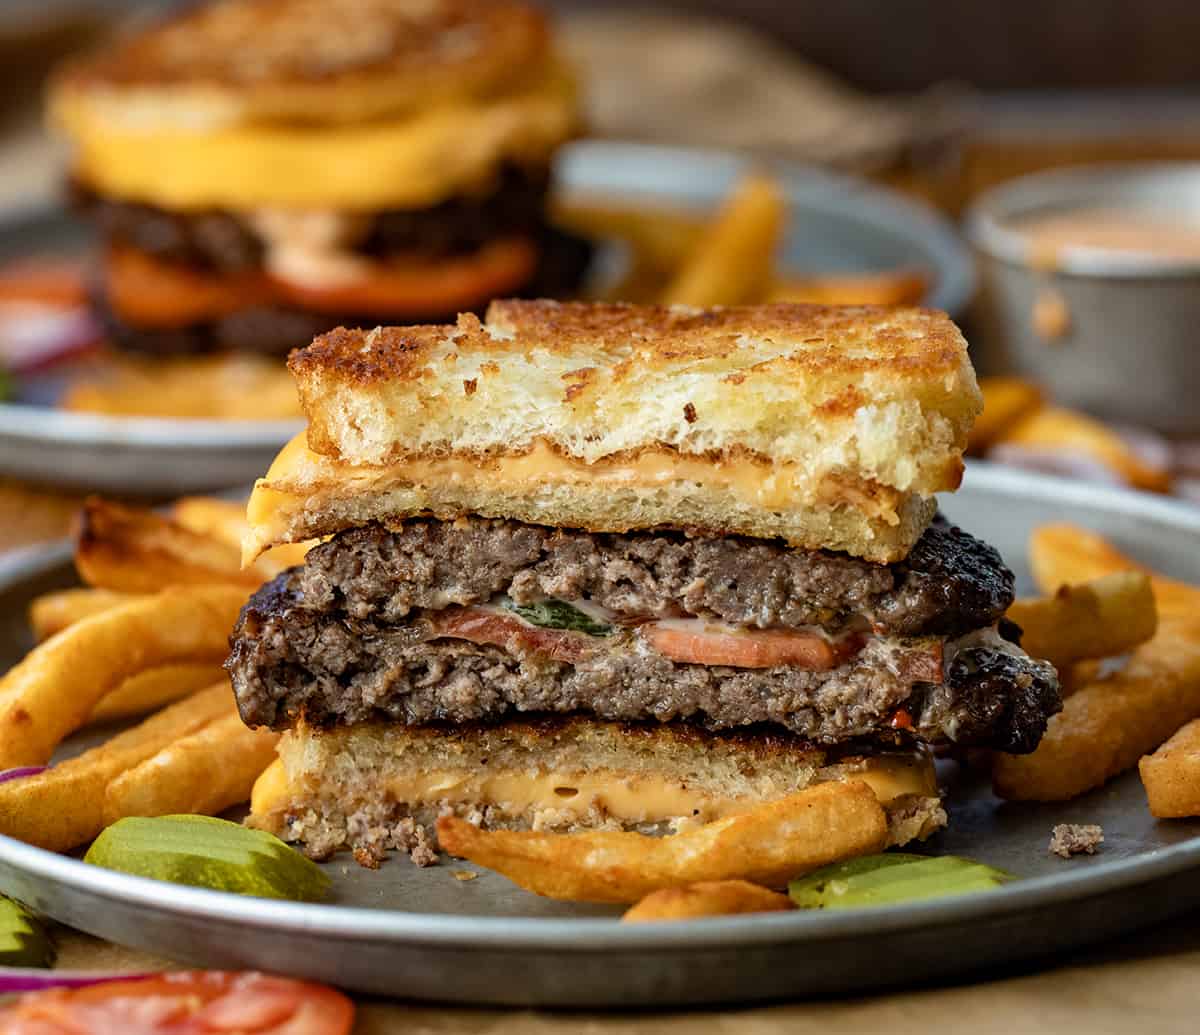 Grilled Cheese Burgers cut in half on a plate with fries.